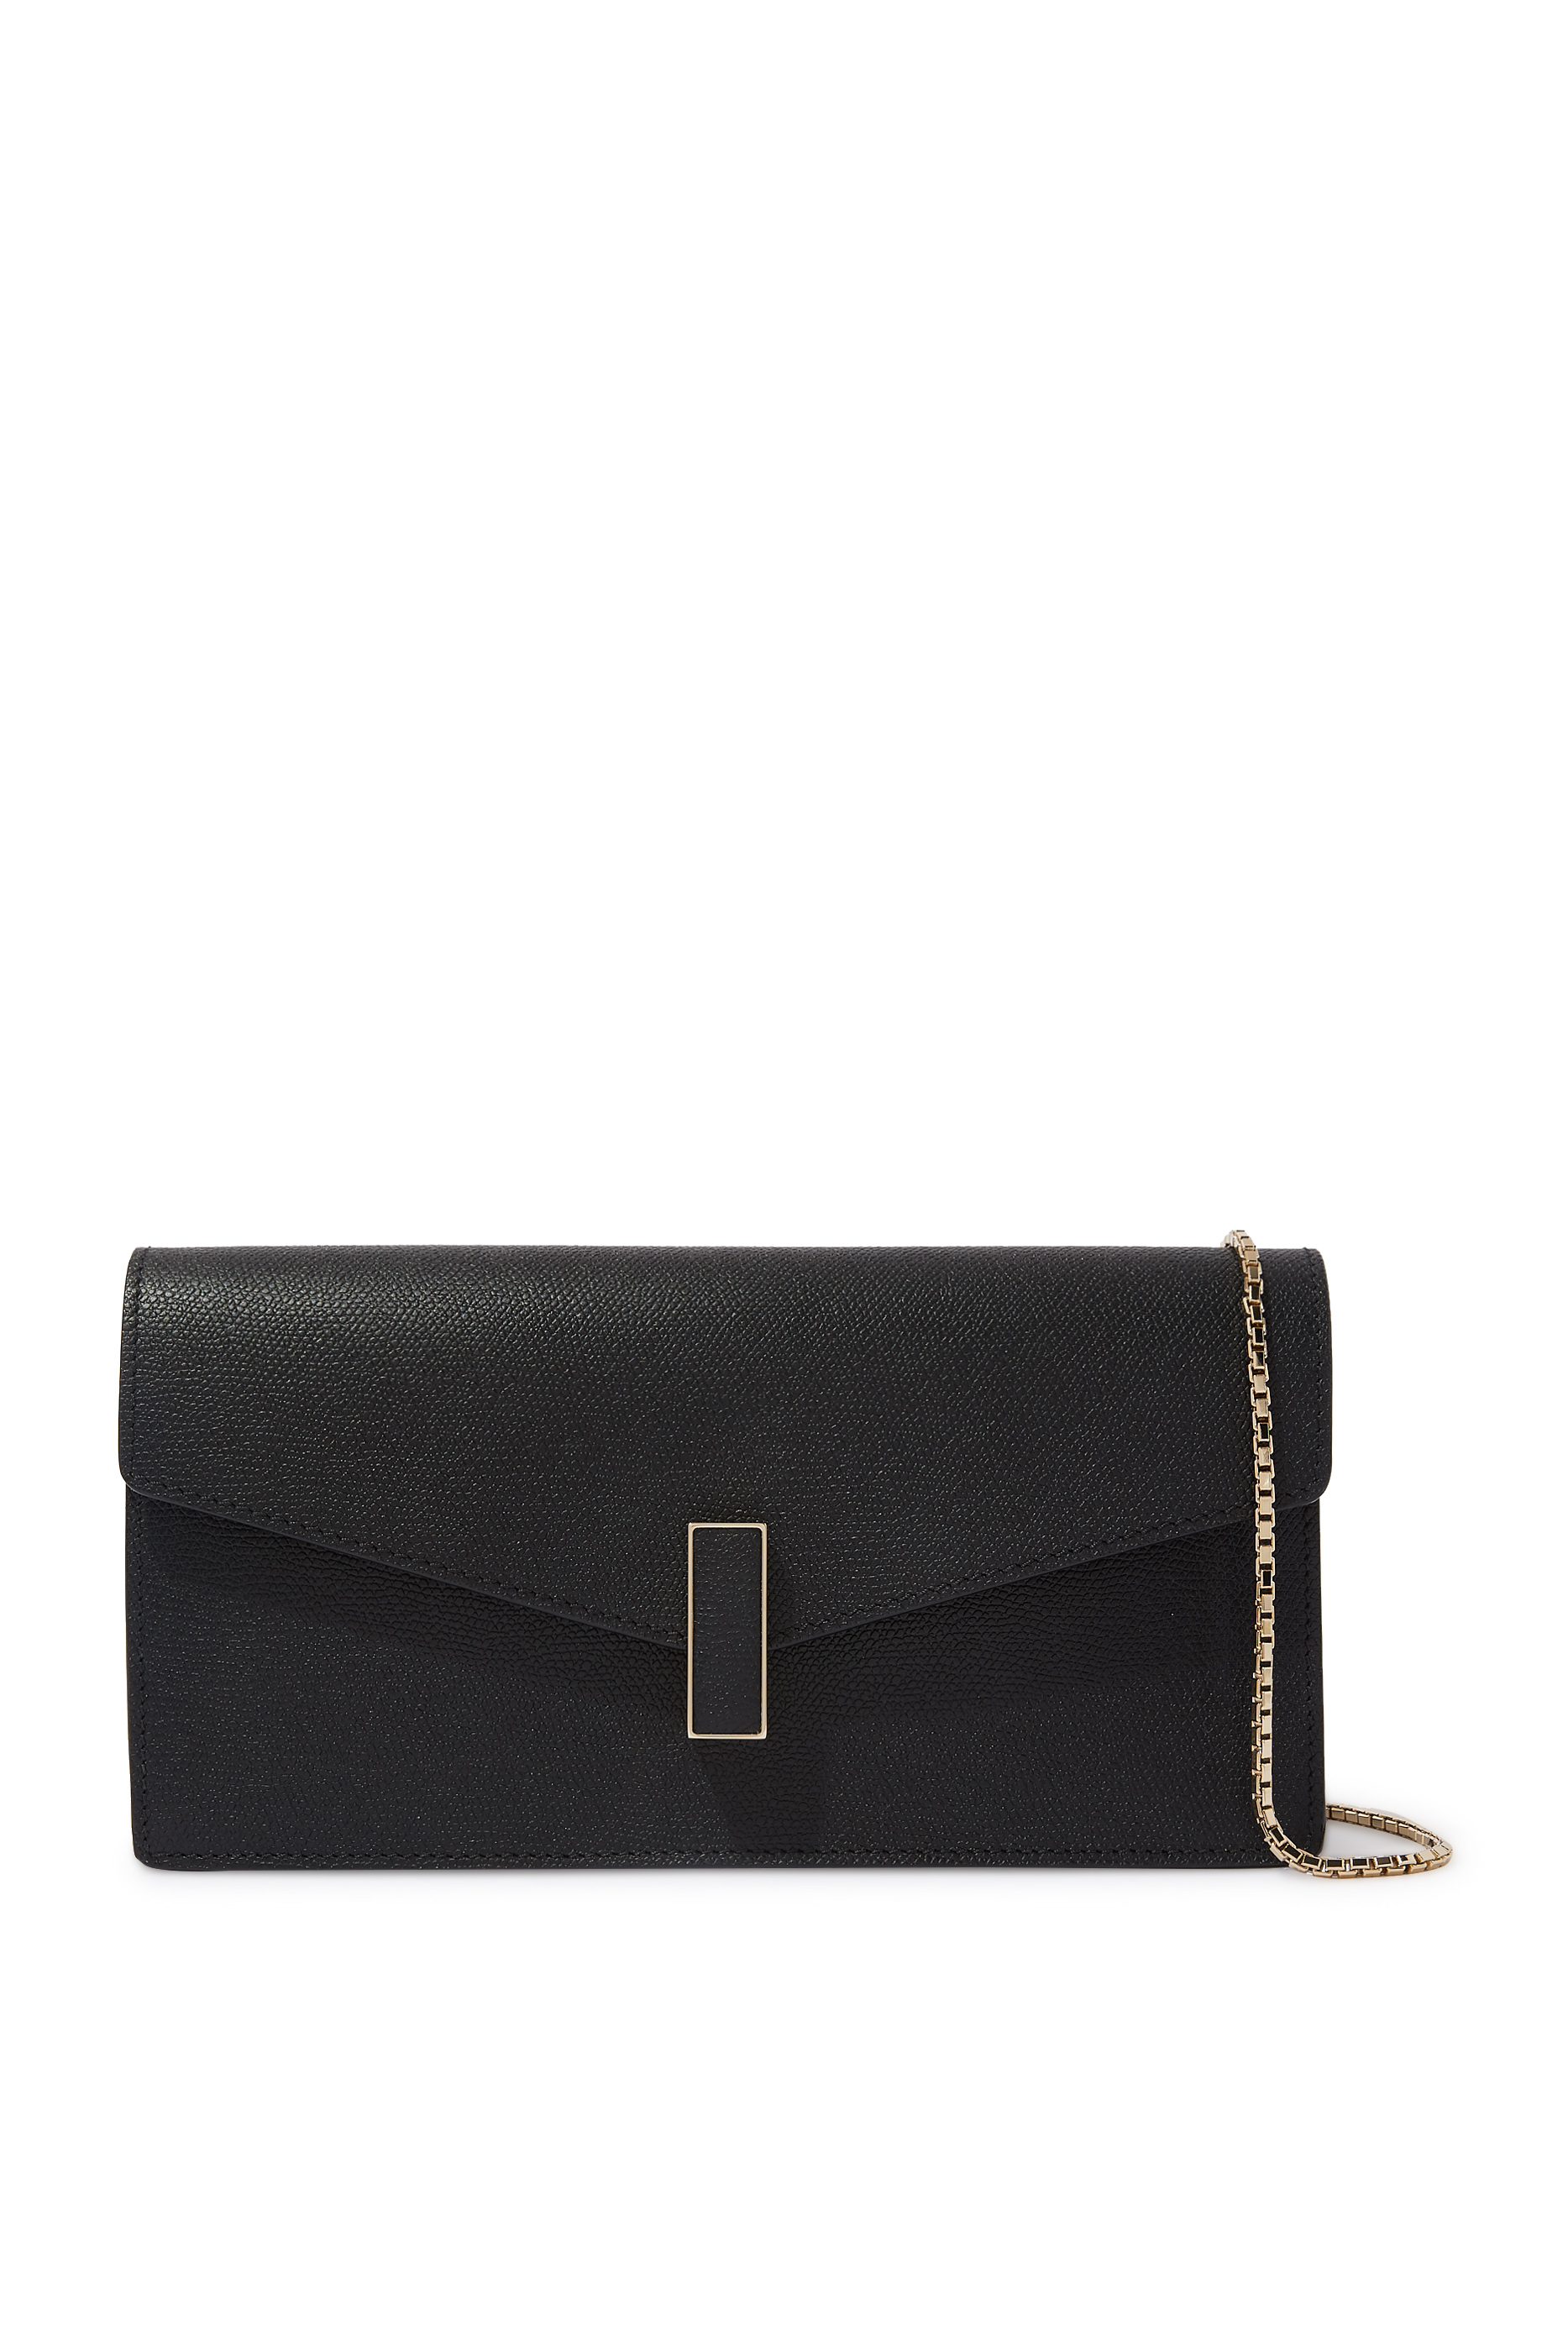 Buy Valextra Iside Leather Clutch for Womens | Bloomingdale's UAE